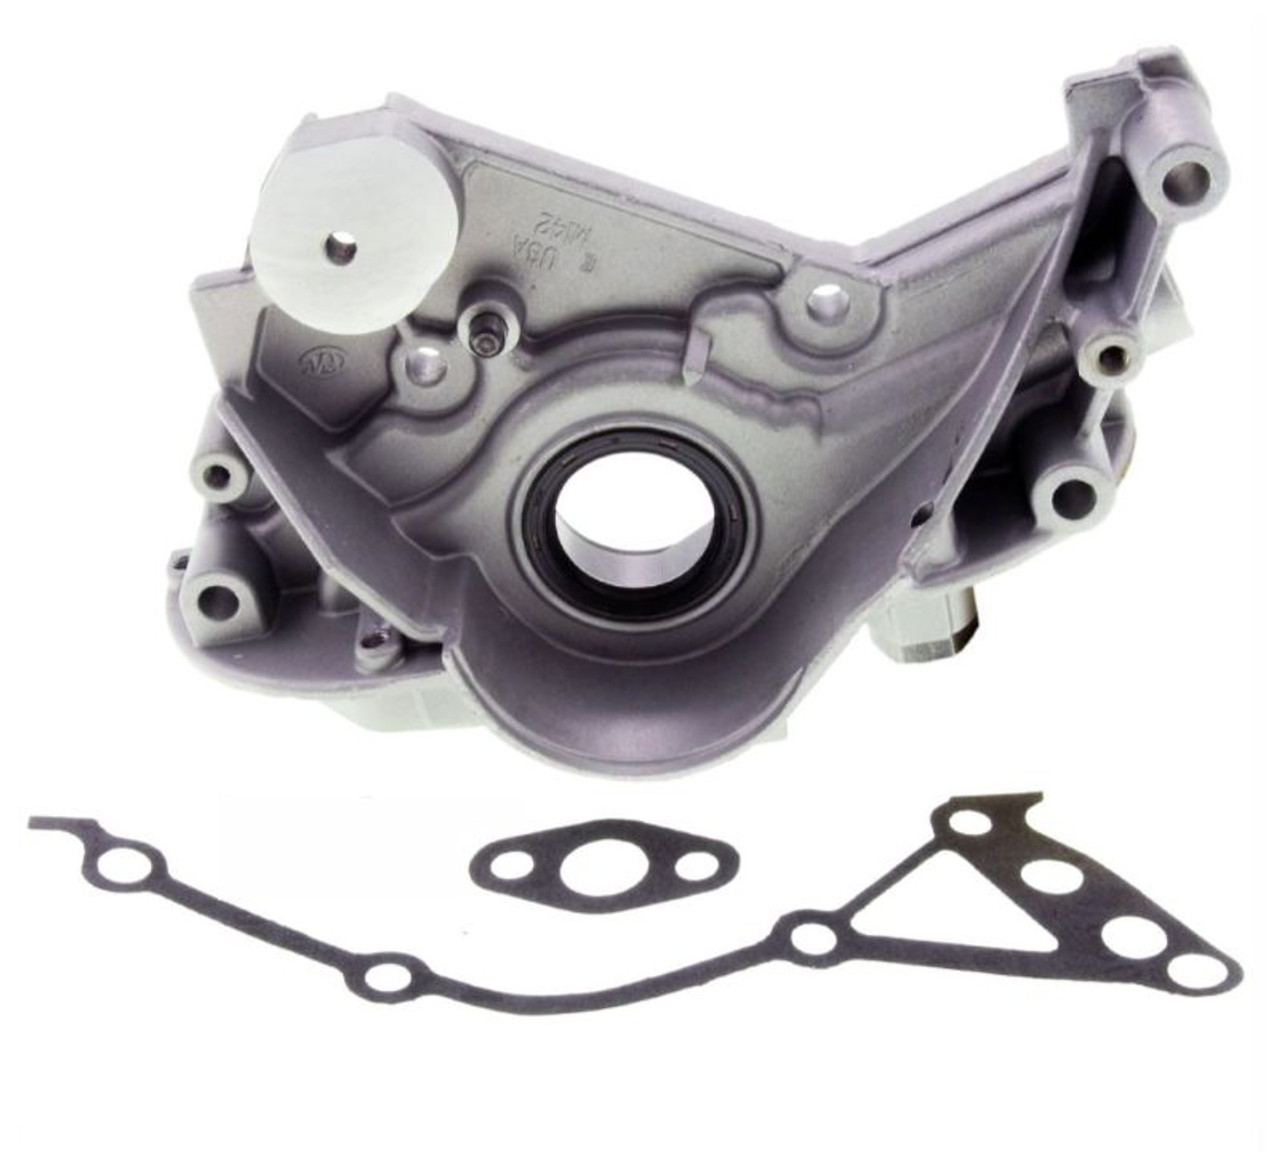 Oil Pump - 1991 Plymouth Voyager 3.0L (EP142.D36)